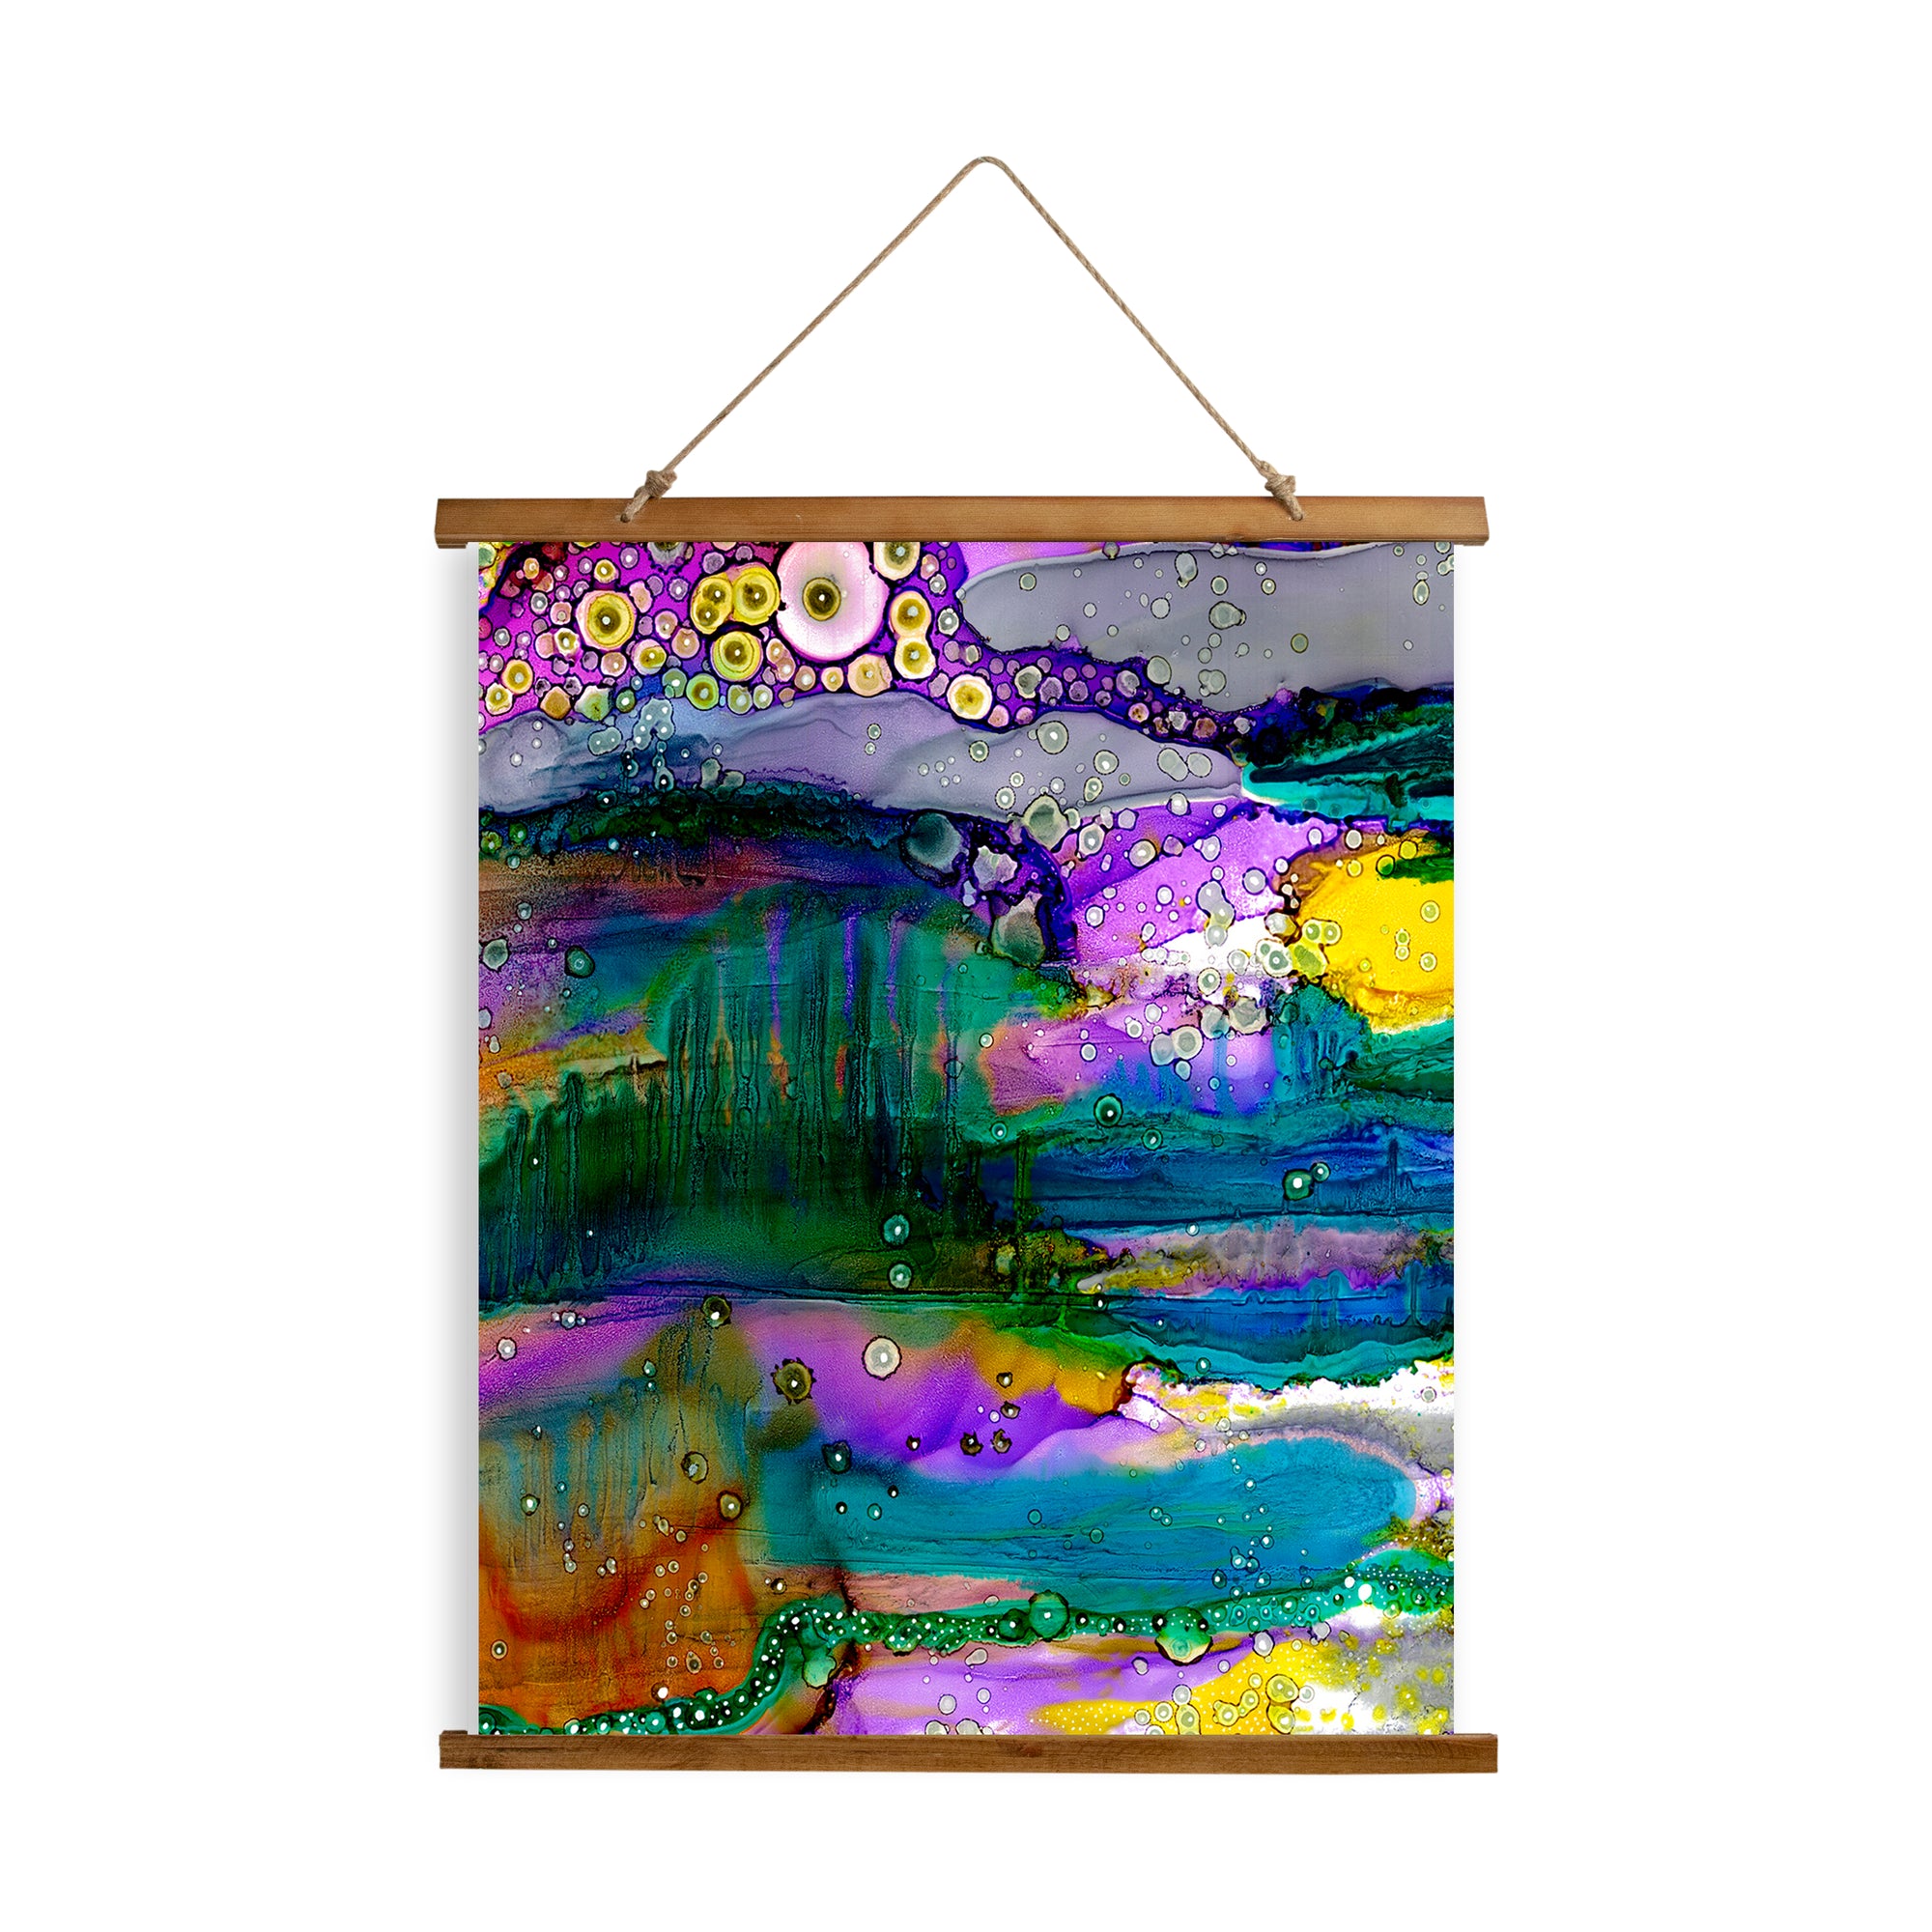 Whimsical Wood Slat Tapestry "Purple Mountains"